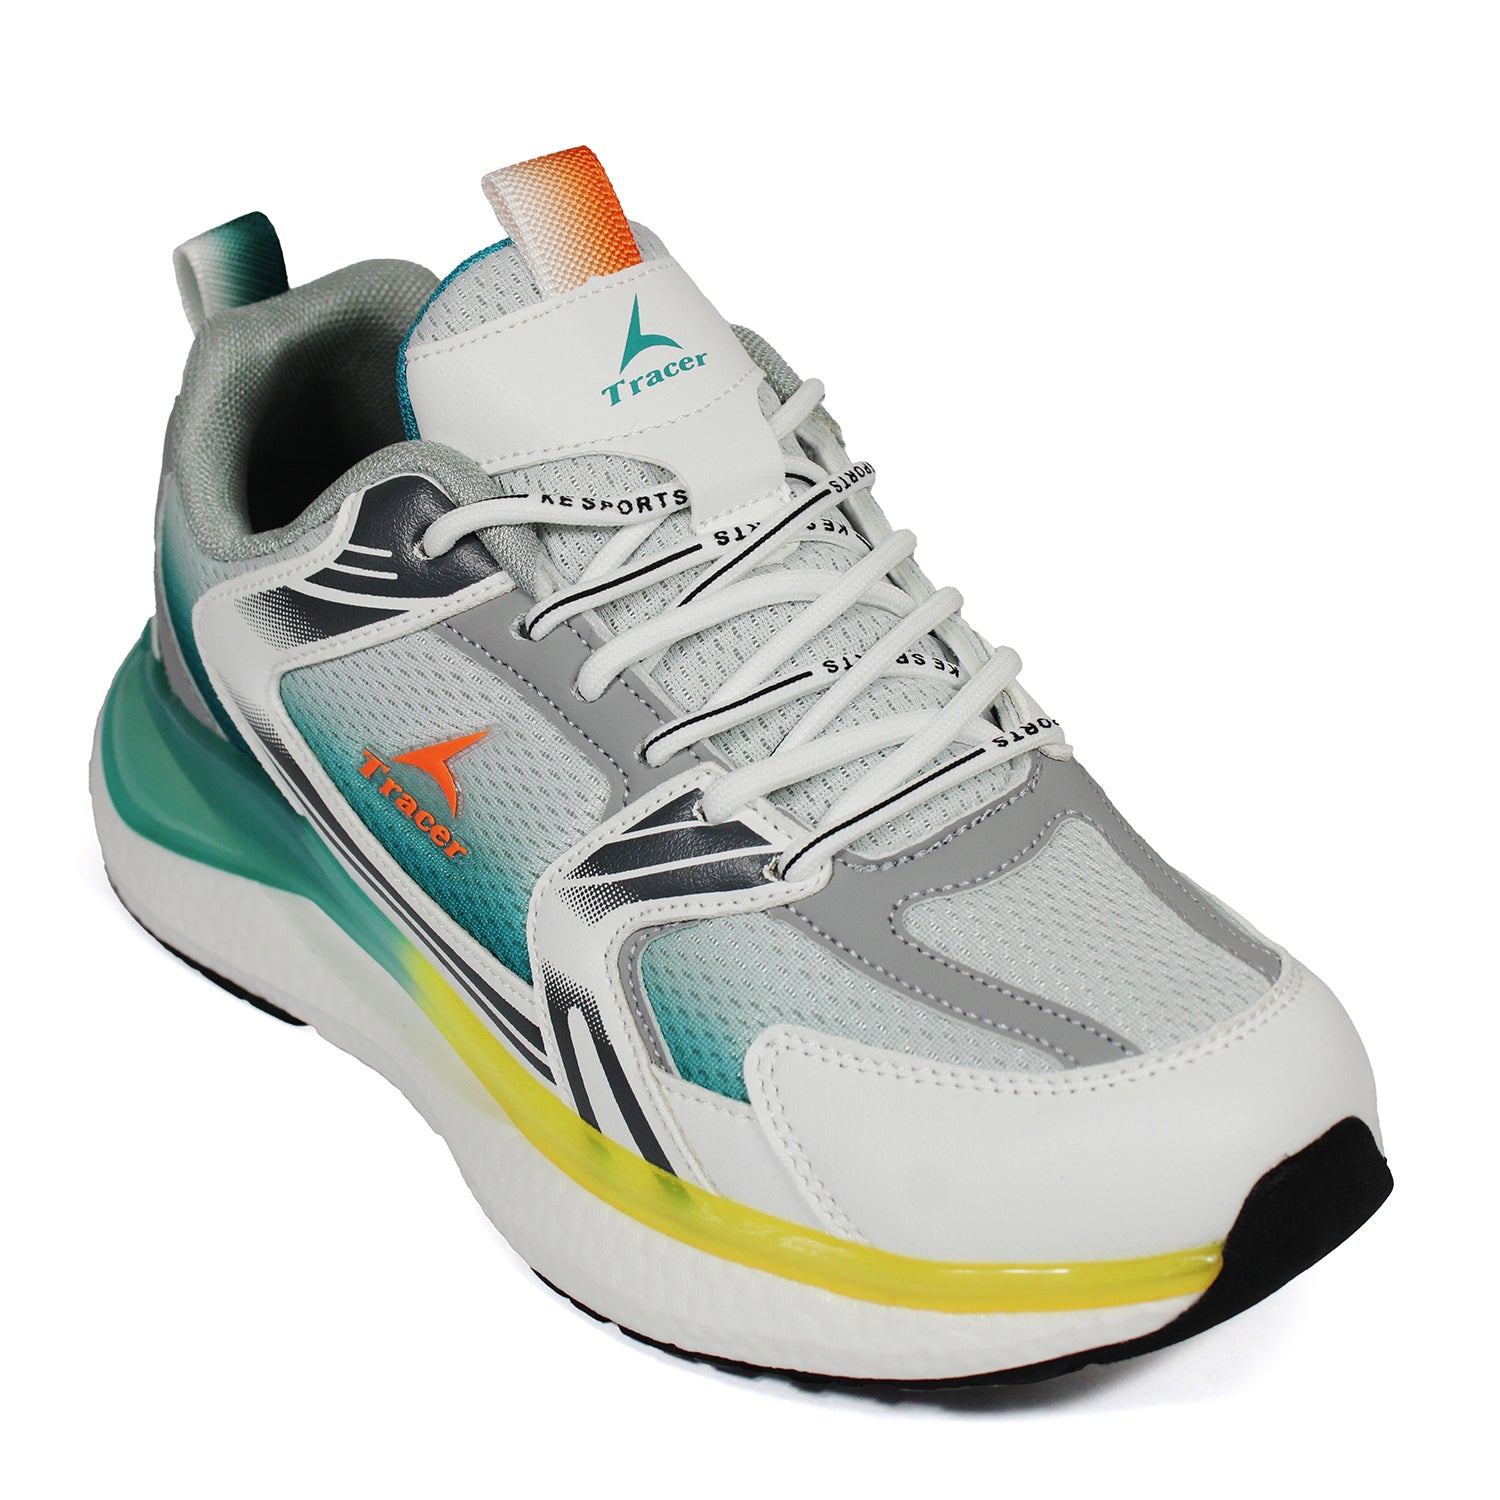 Tracer Shoes| White Grey| Men's Collection